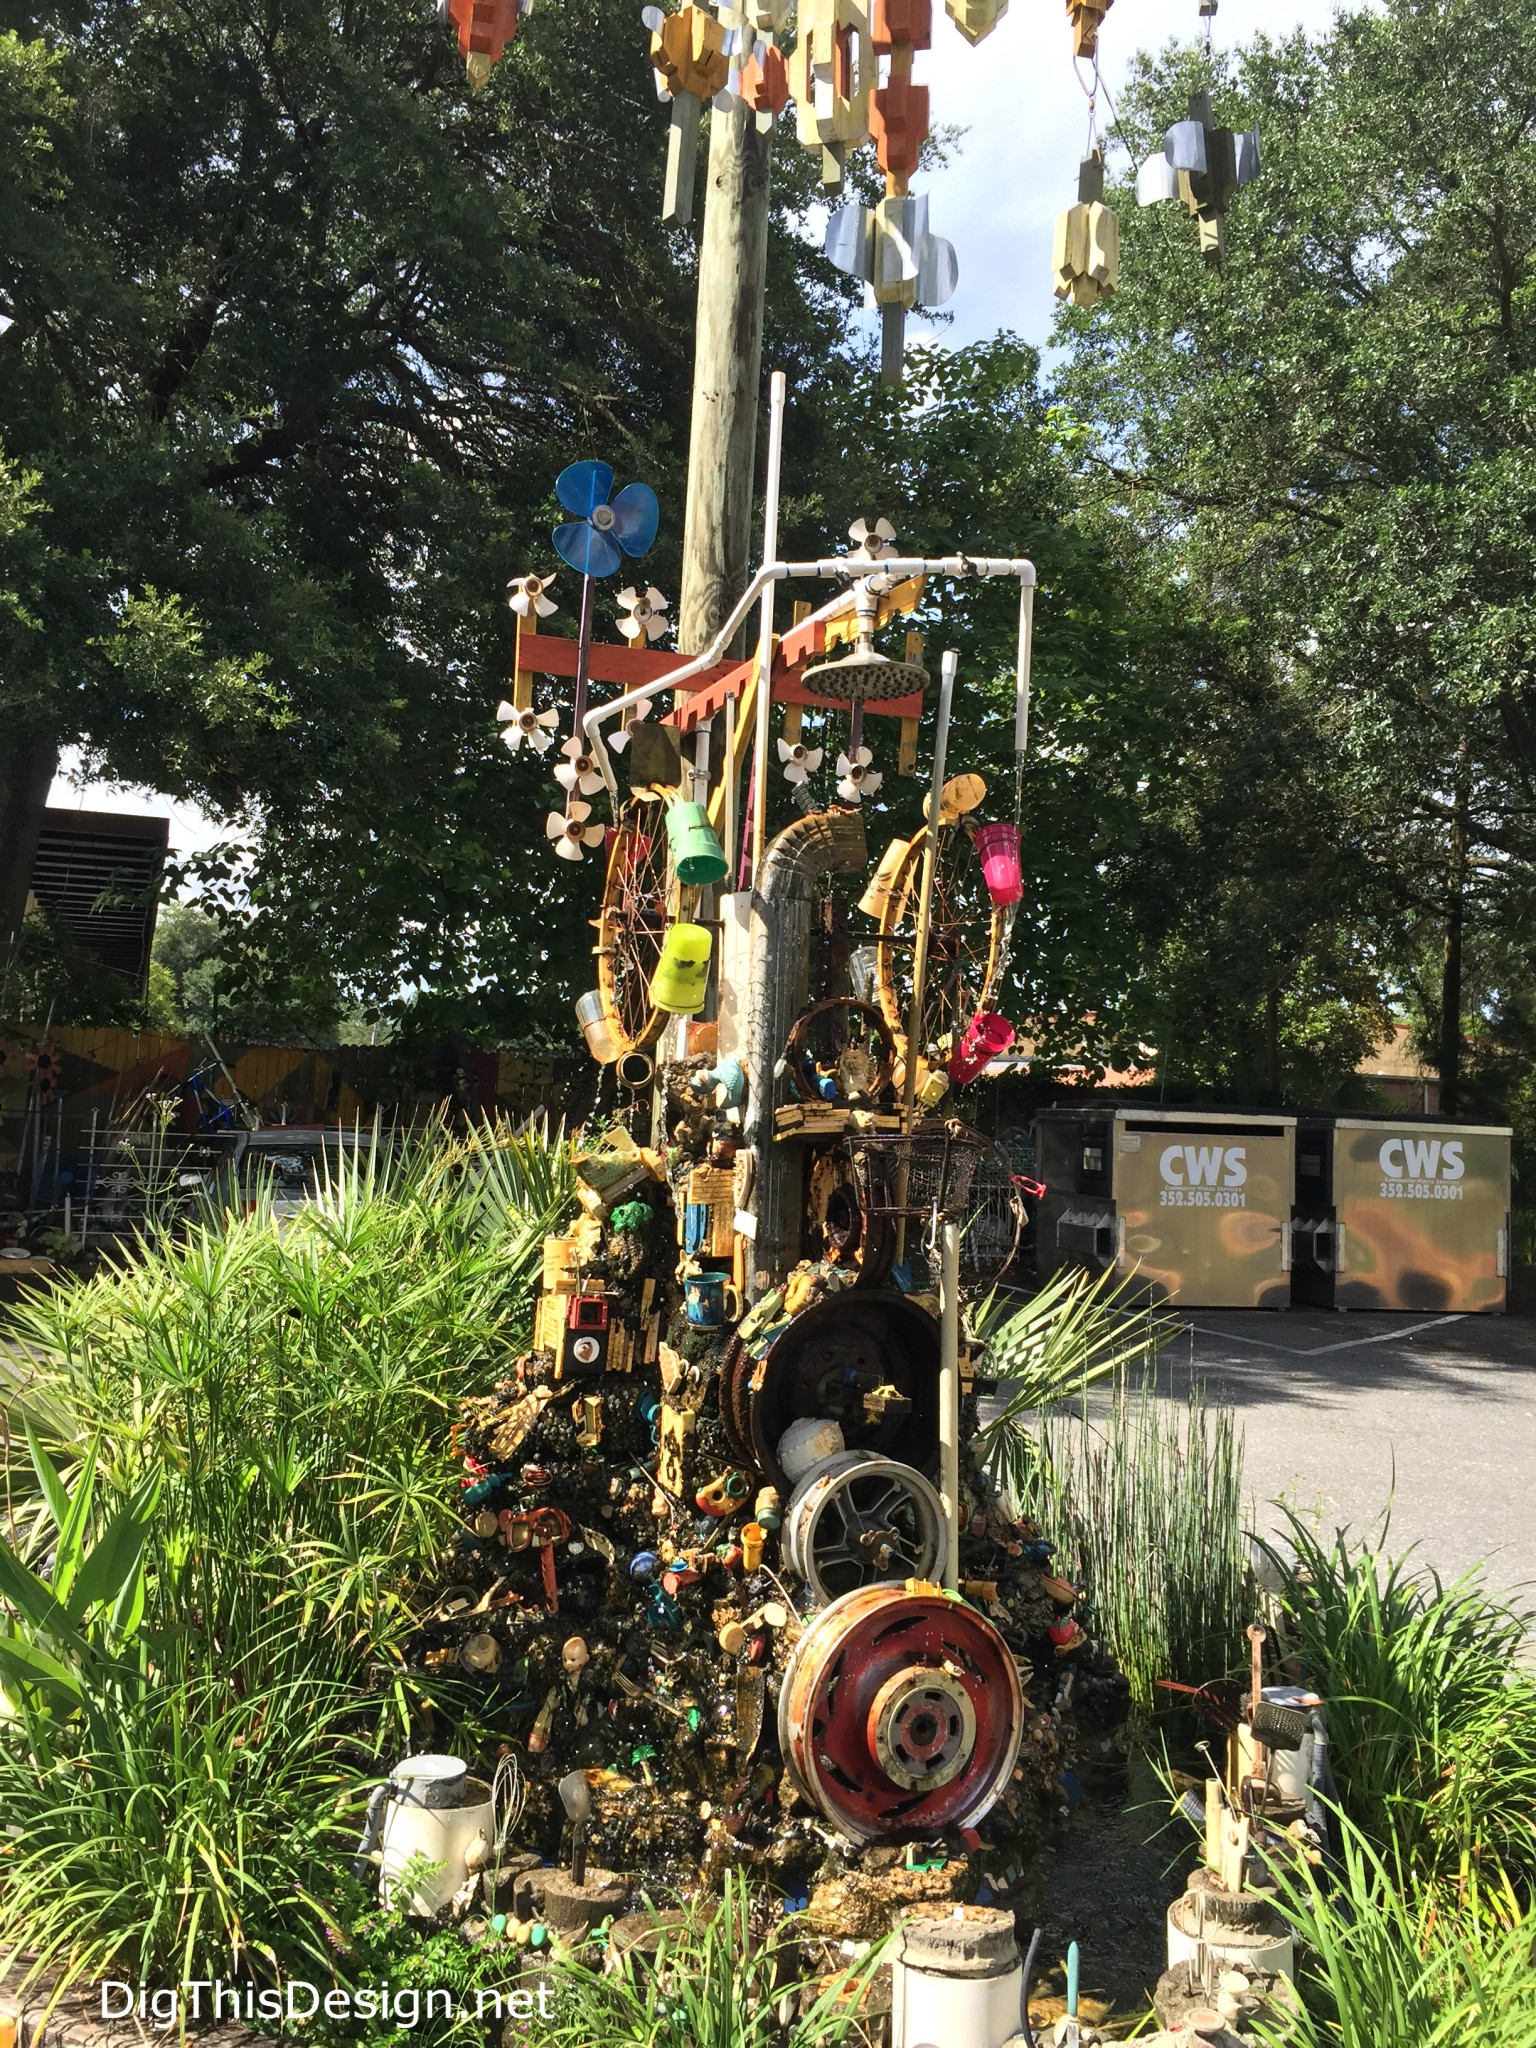 Satchel's outdoor garden Junk Art sculture made from repurposed, reused, and upcycled vintage items